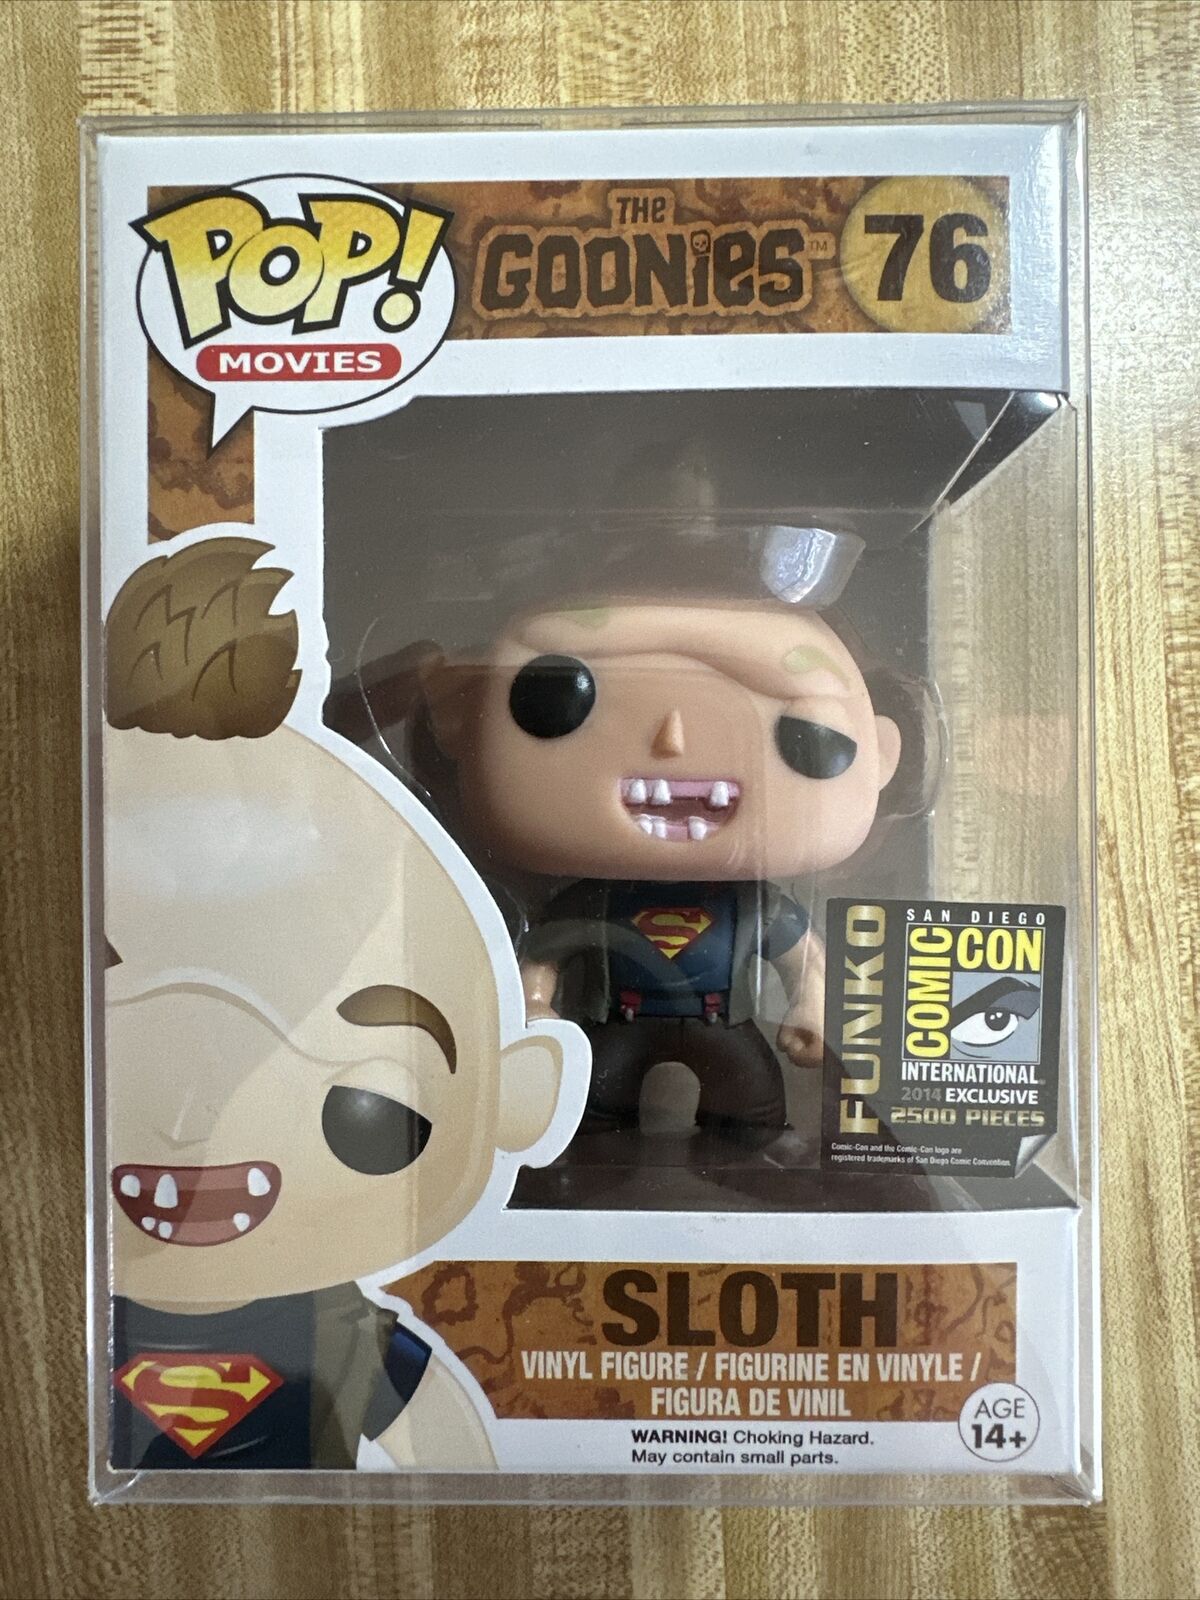 FUNKO POP SLOTH SUPERMAN SHIRT GOONIES SDCC EXCLUSIVE RARE LIMITED VAULTED #76